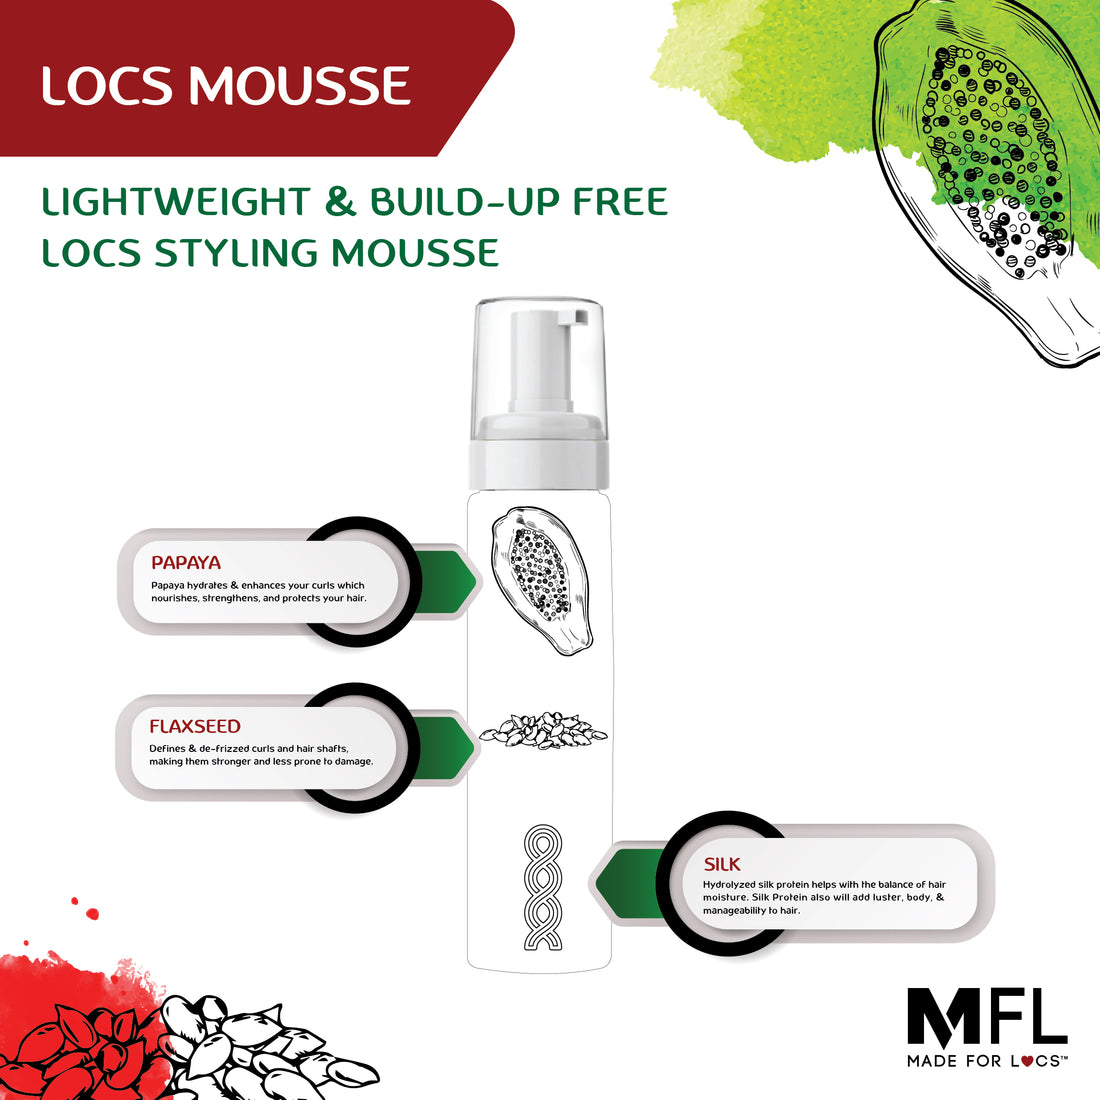 MADE FOR LOCS STYLING MOUSSE INGREDIENTS HIGHLIGHTS